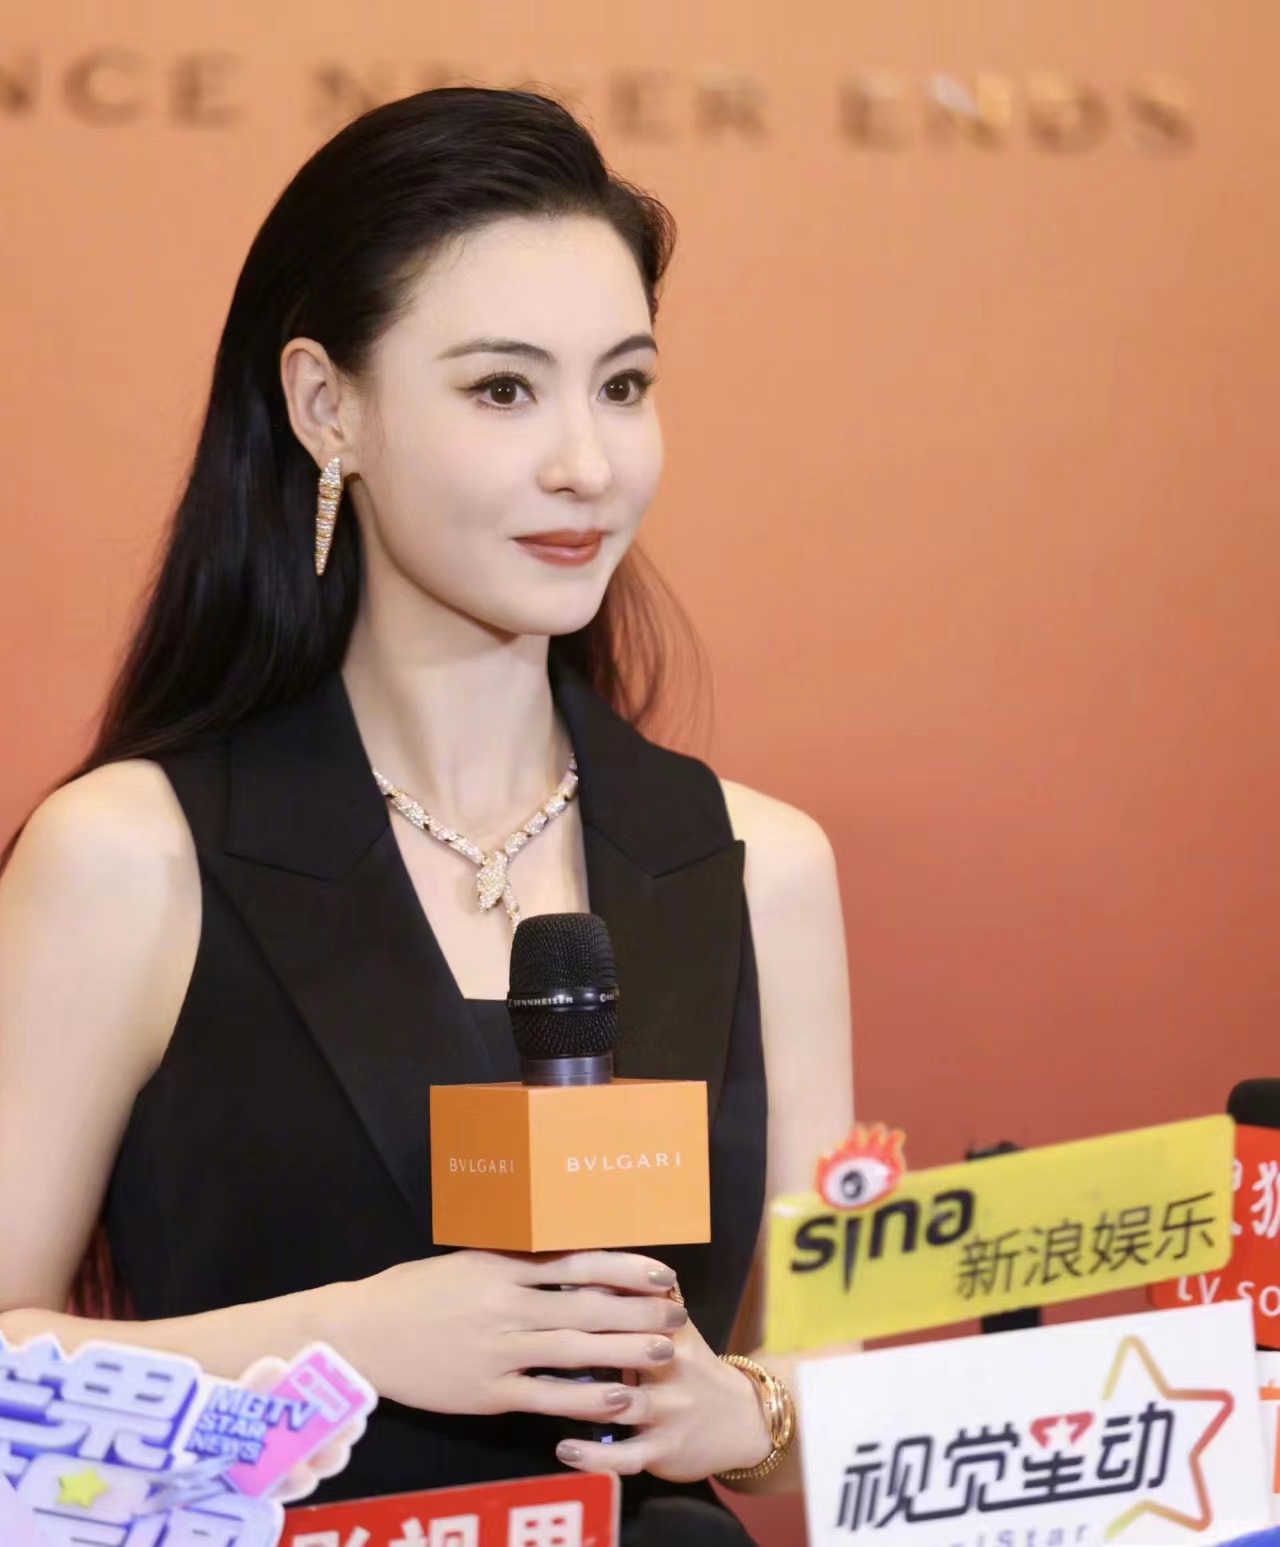 43 Year Old Cecilia Cheung And 24 Year Old Zhao Lusi Are In The Same Frame One Black And One 5783